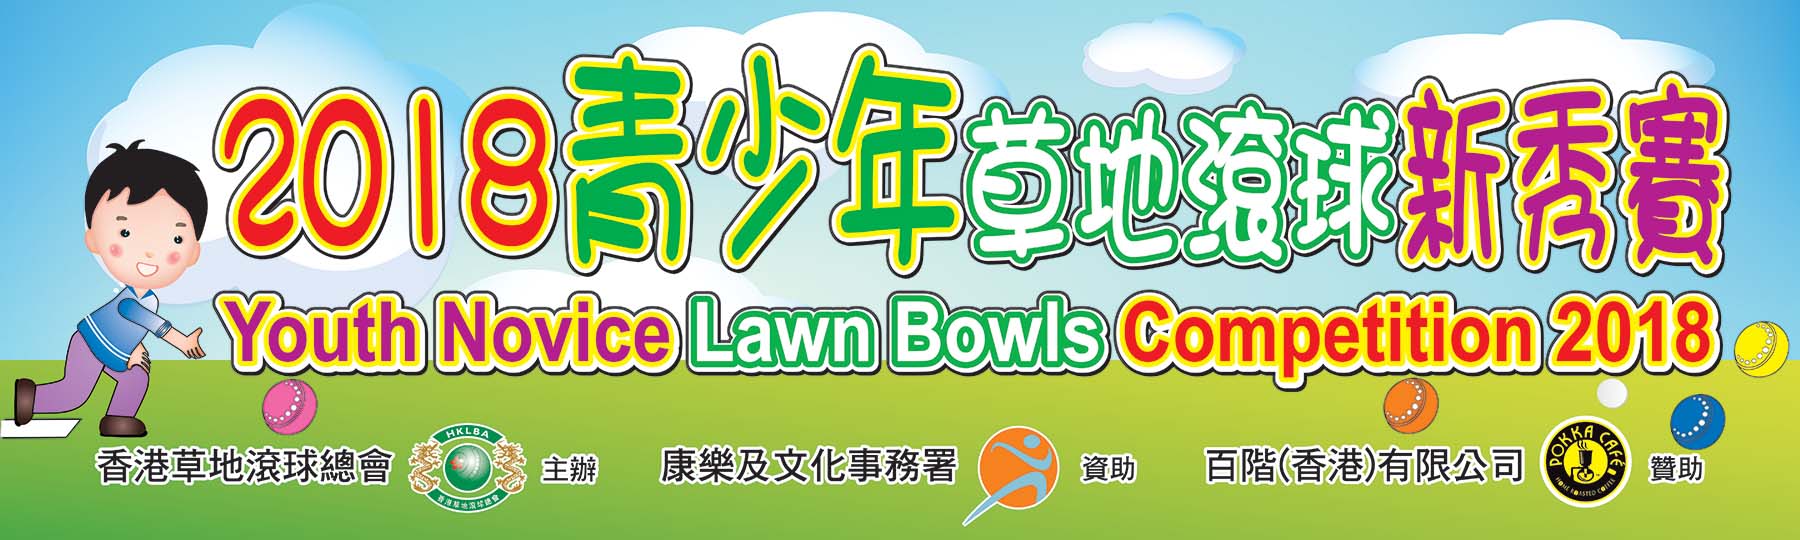 Youth Novice Lawn Bowls Competition 2018 (Updated on 5/3/18)